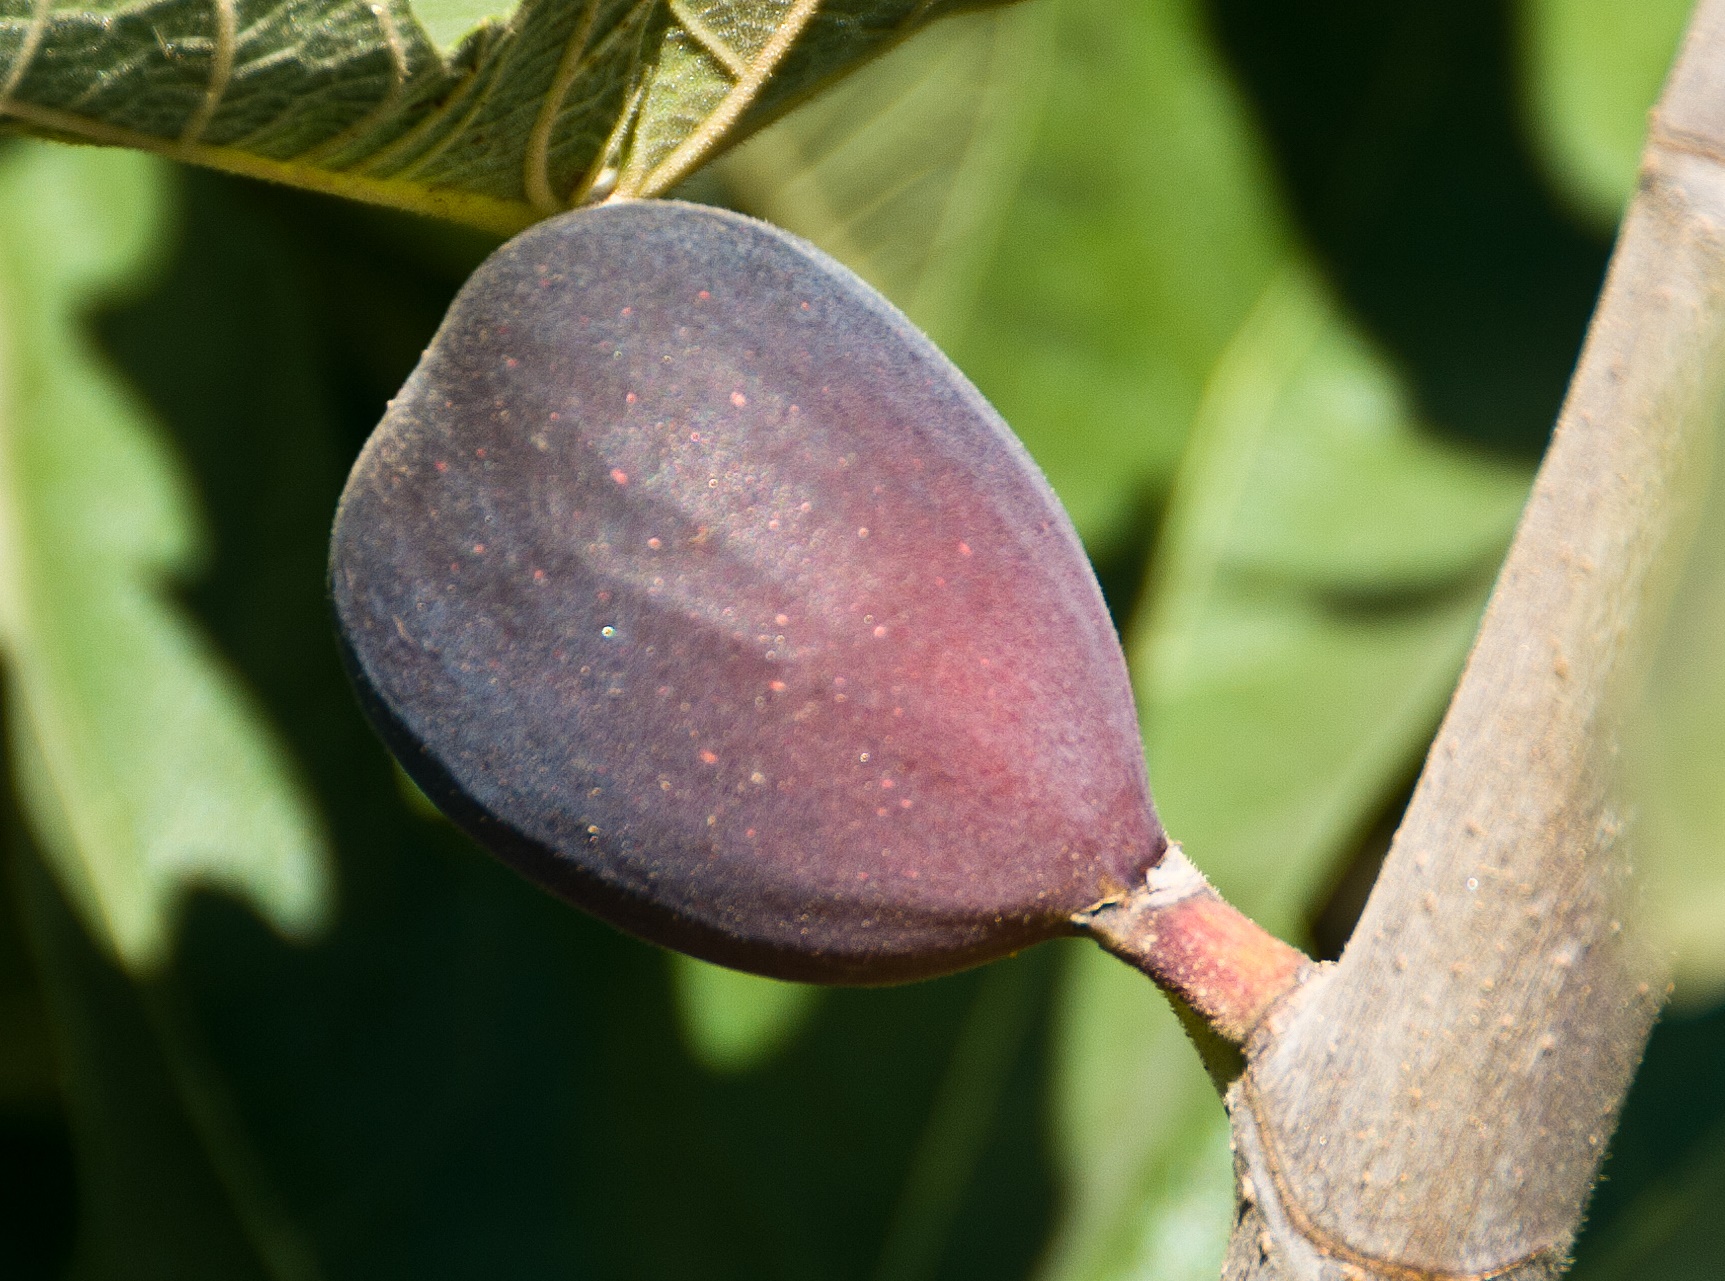 Black Mission Fig. One of the most popular figs. Medium to large, pear shaped fruit. Flesh is strawberry colored and good flavor. Good for fresh eating or dried fruit.